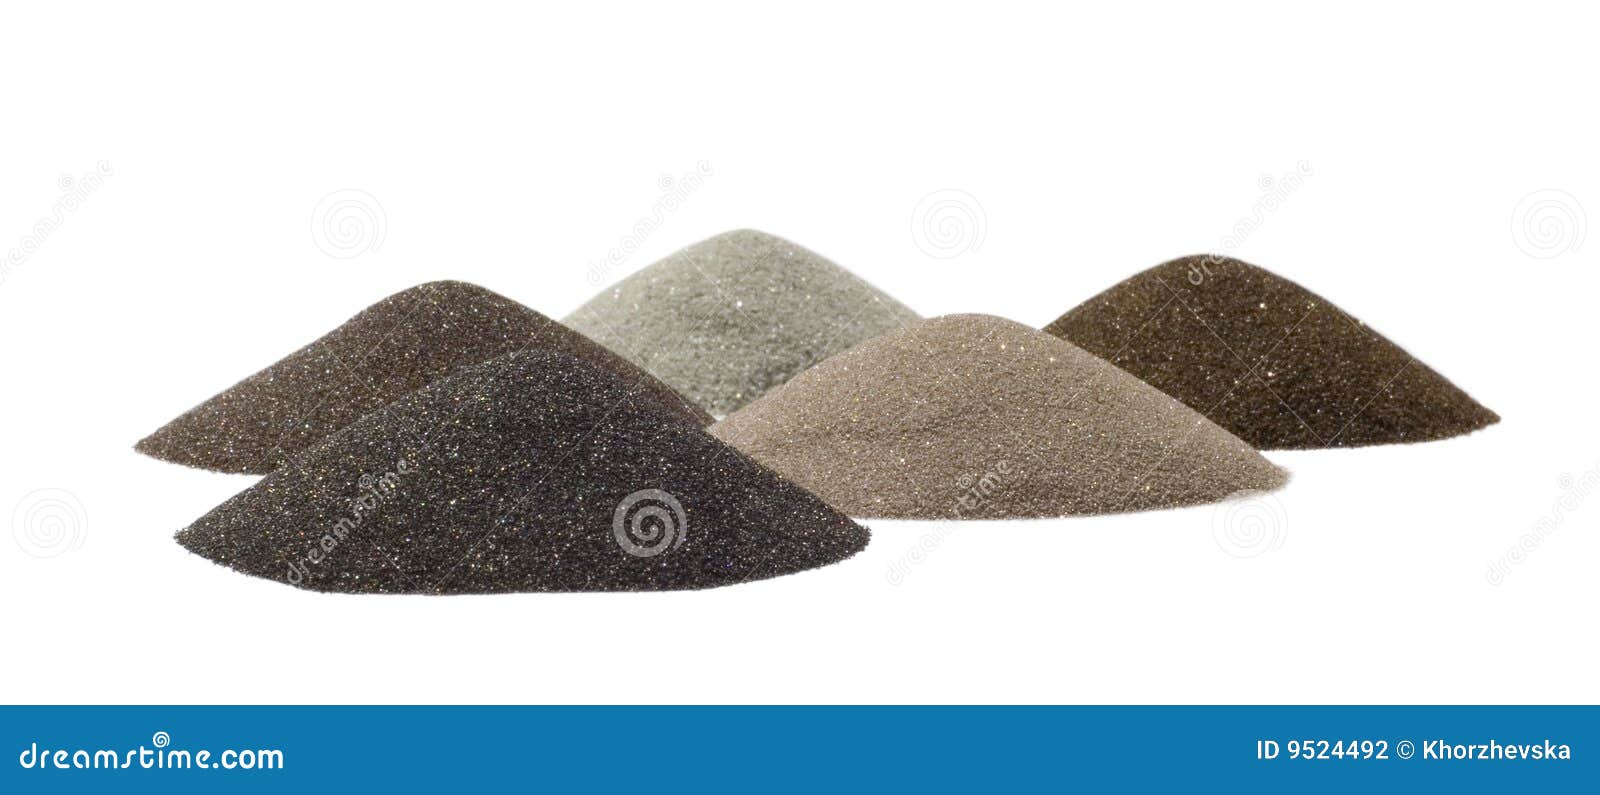 sand's cones - minerals of mining industry